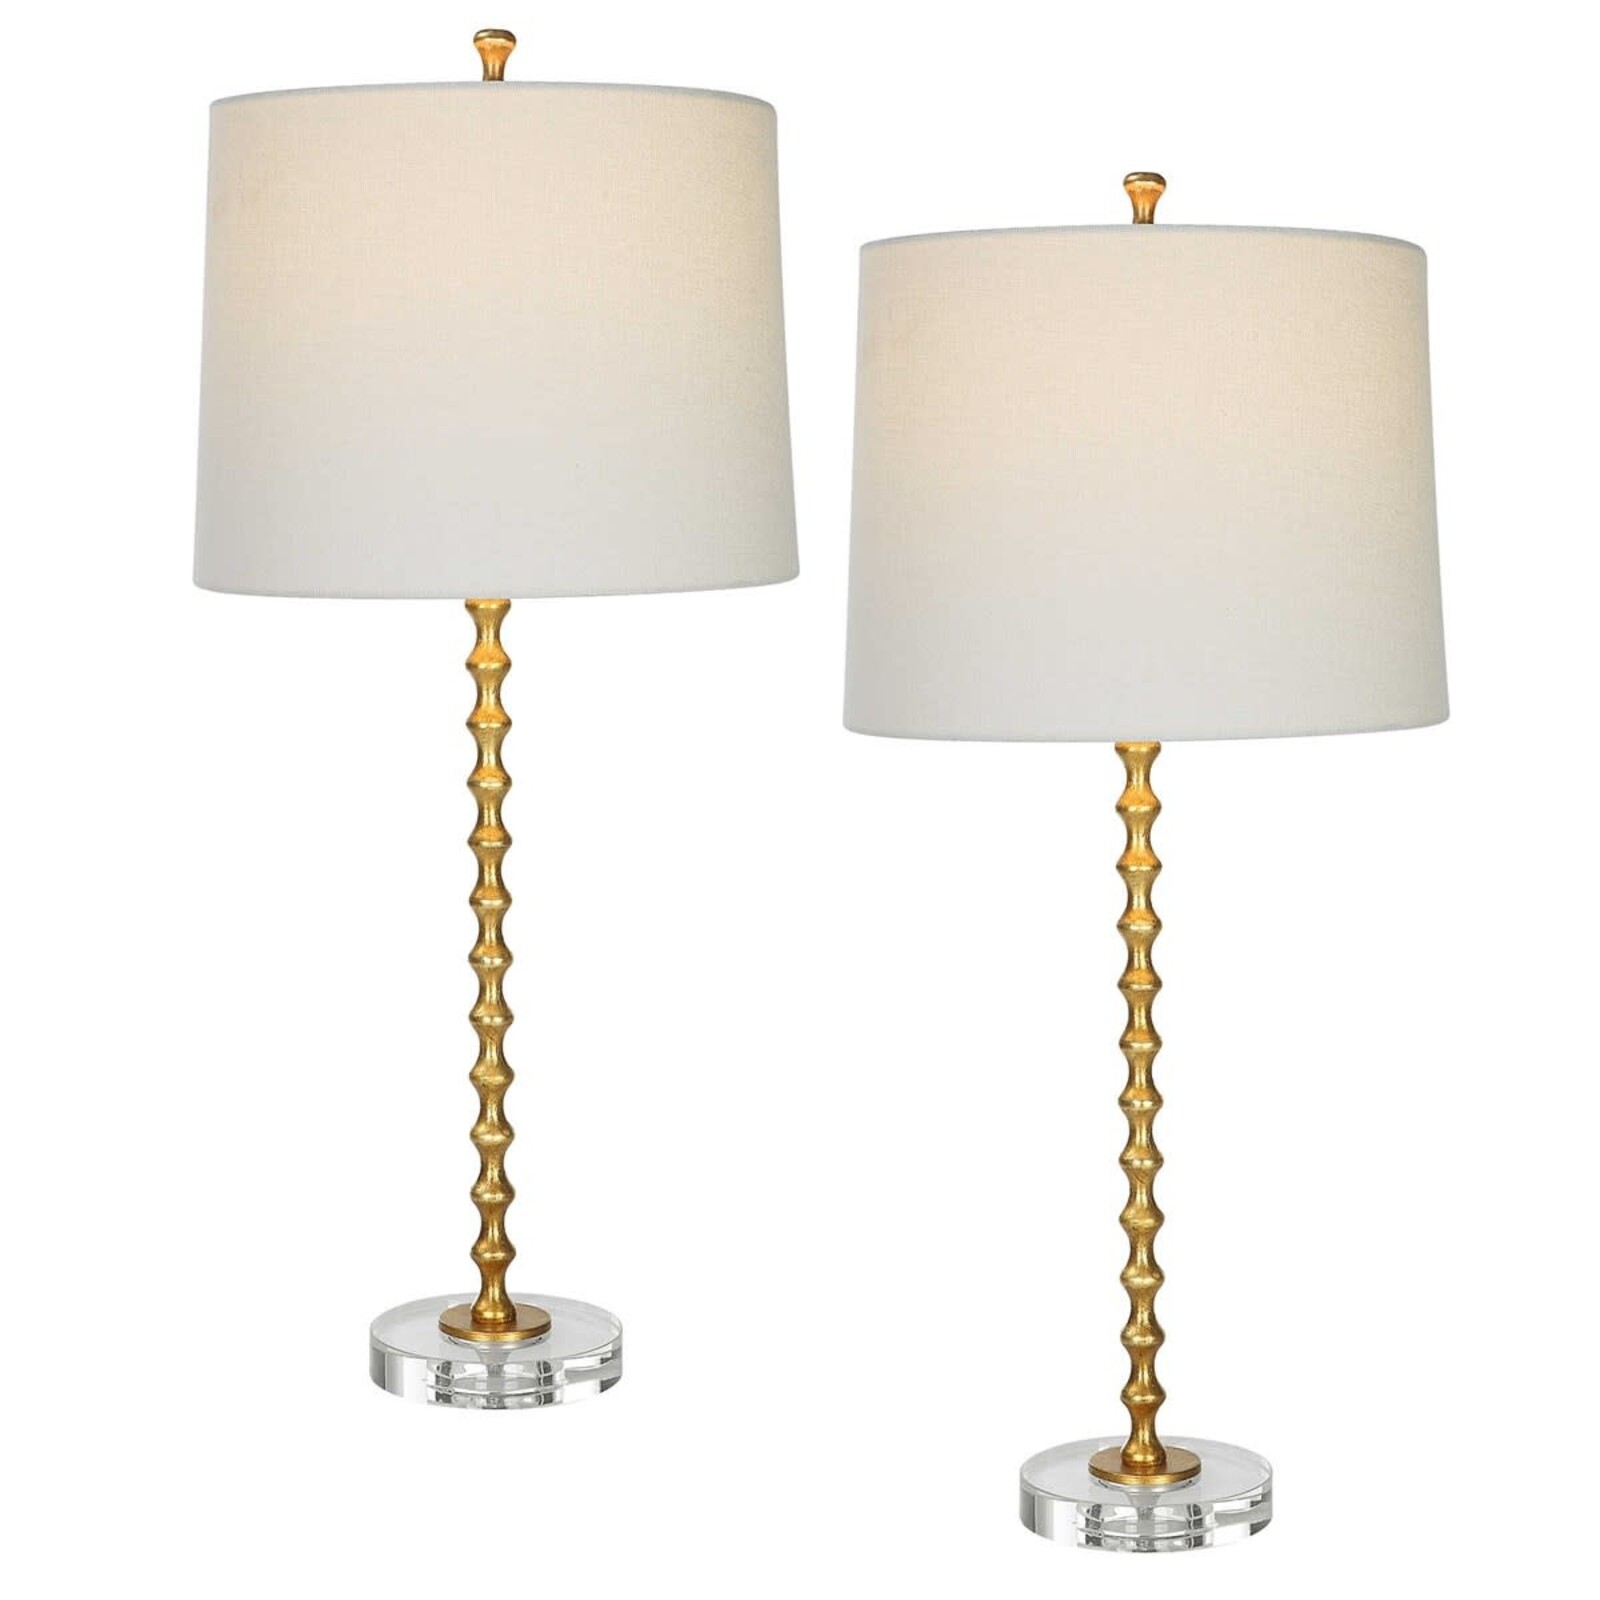 Uttermost Gold Leaf Finish TABLE LAMP    W26101-1 loading=